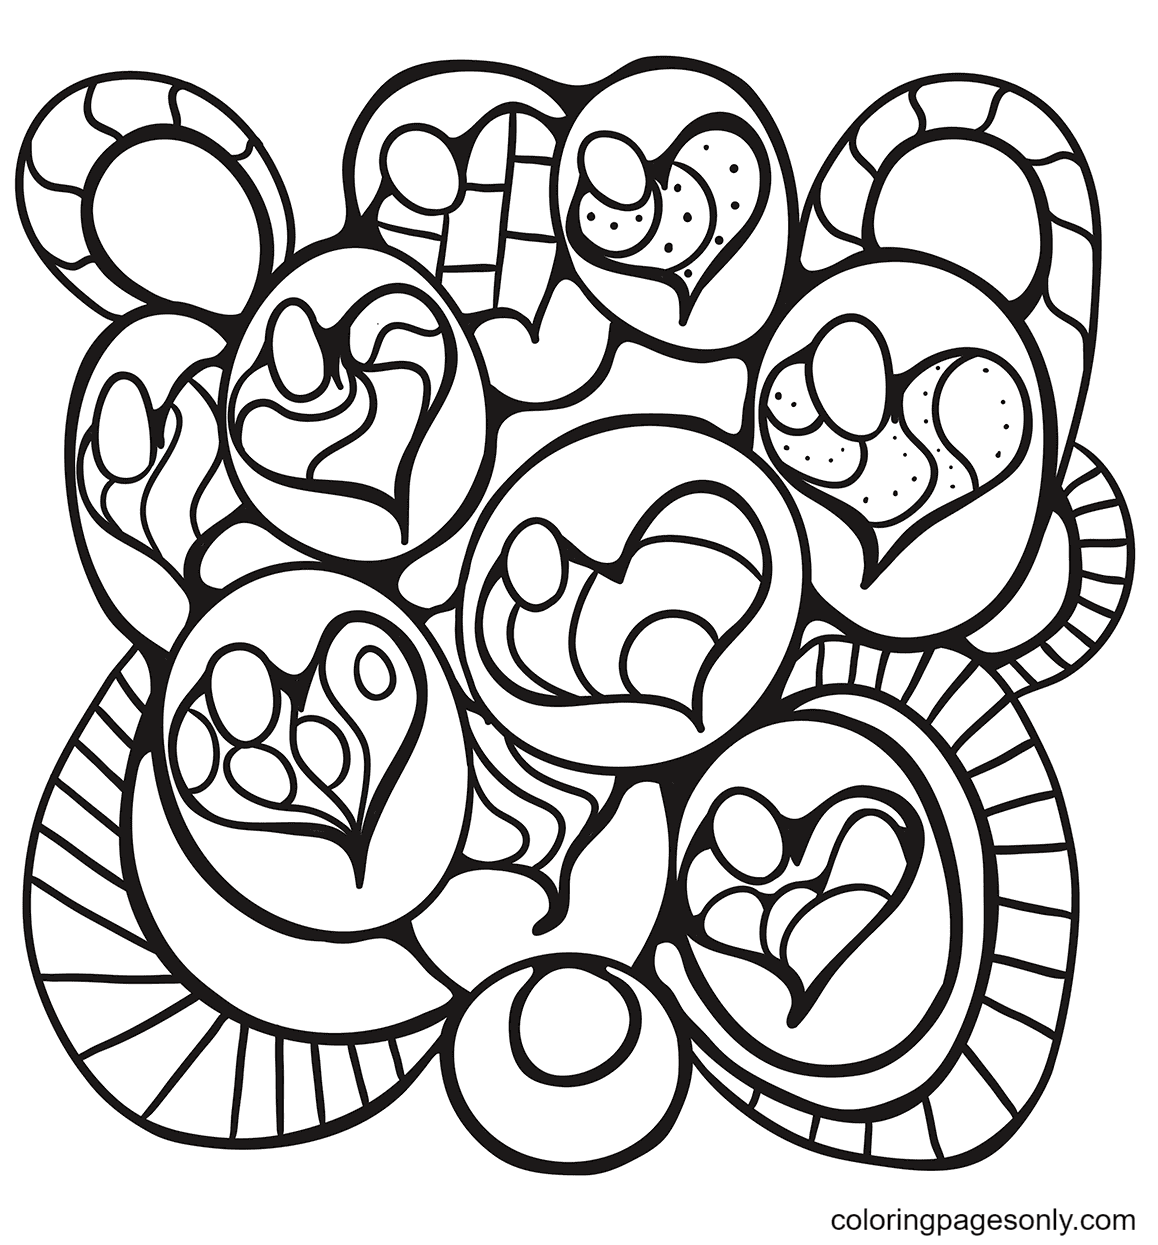 Hearts Pattern Printable Coloring Page